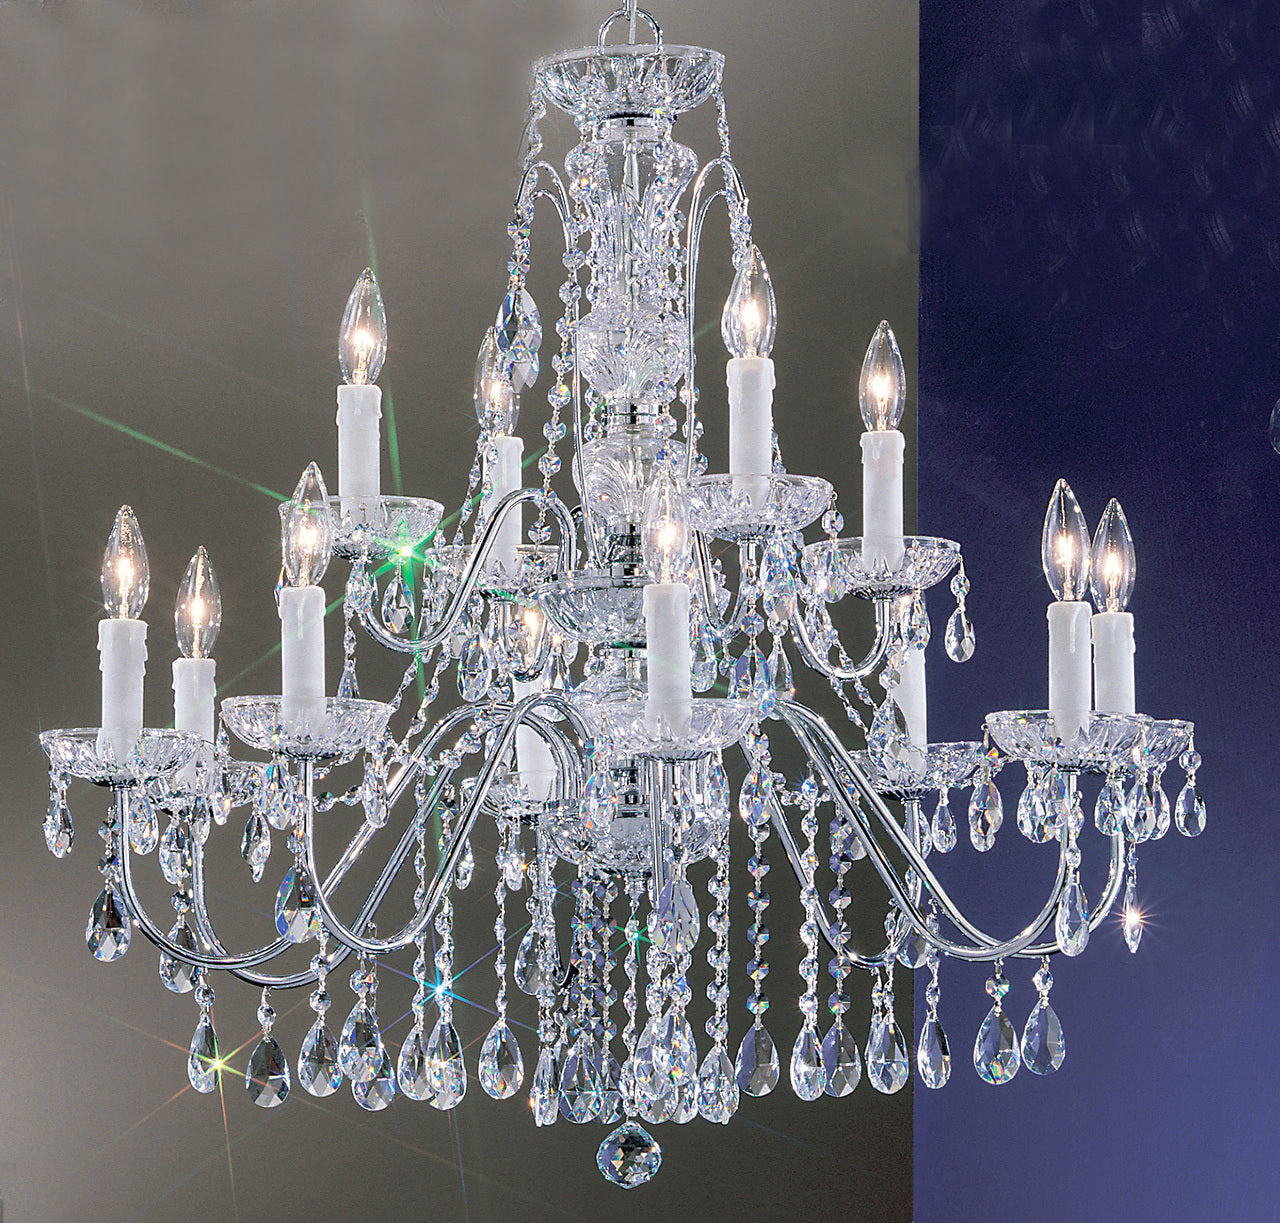 Classic Lighting 8389 CH S Daniele Crystal Chandelier in Chrome